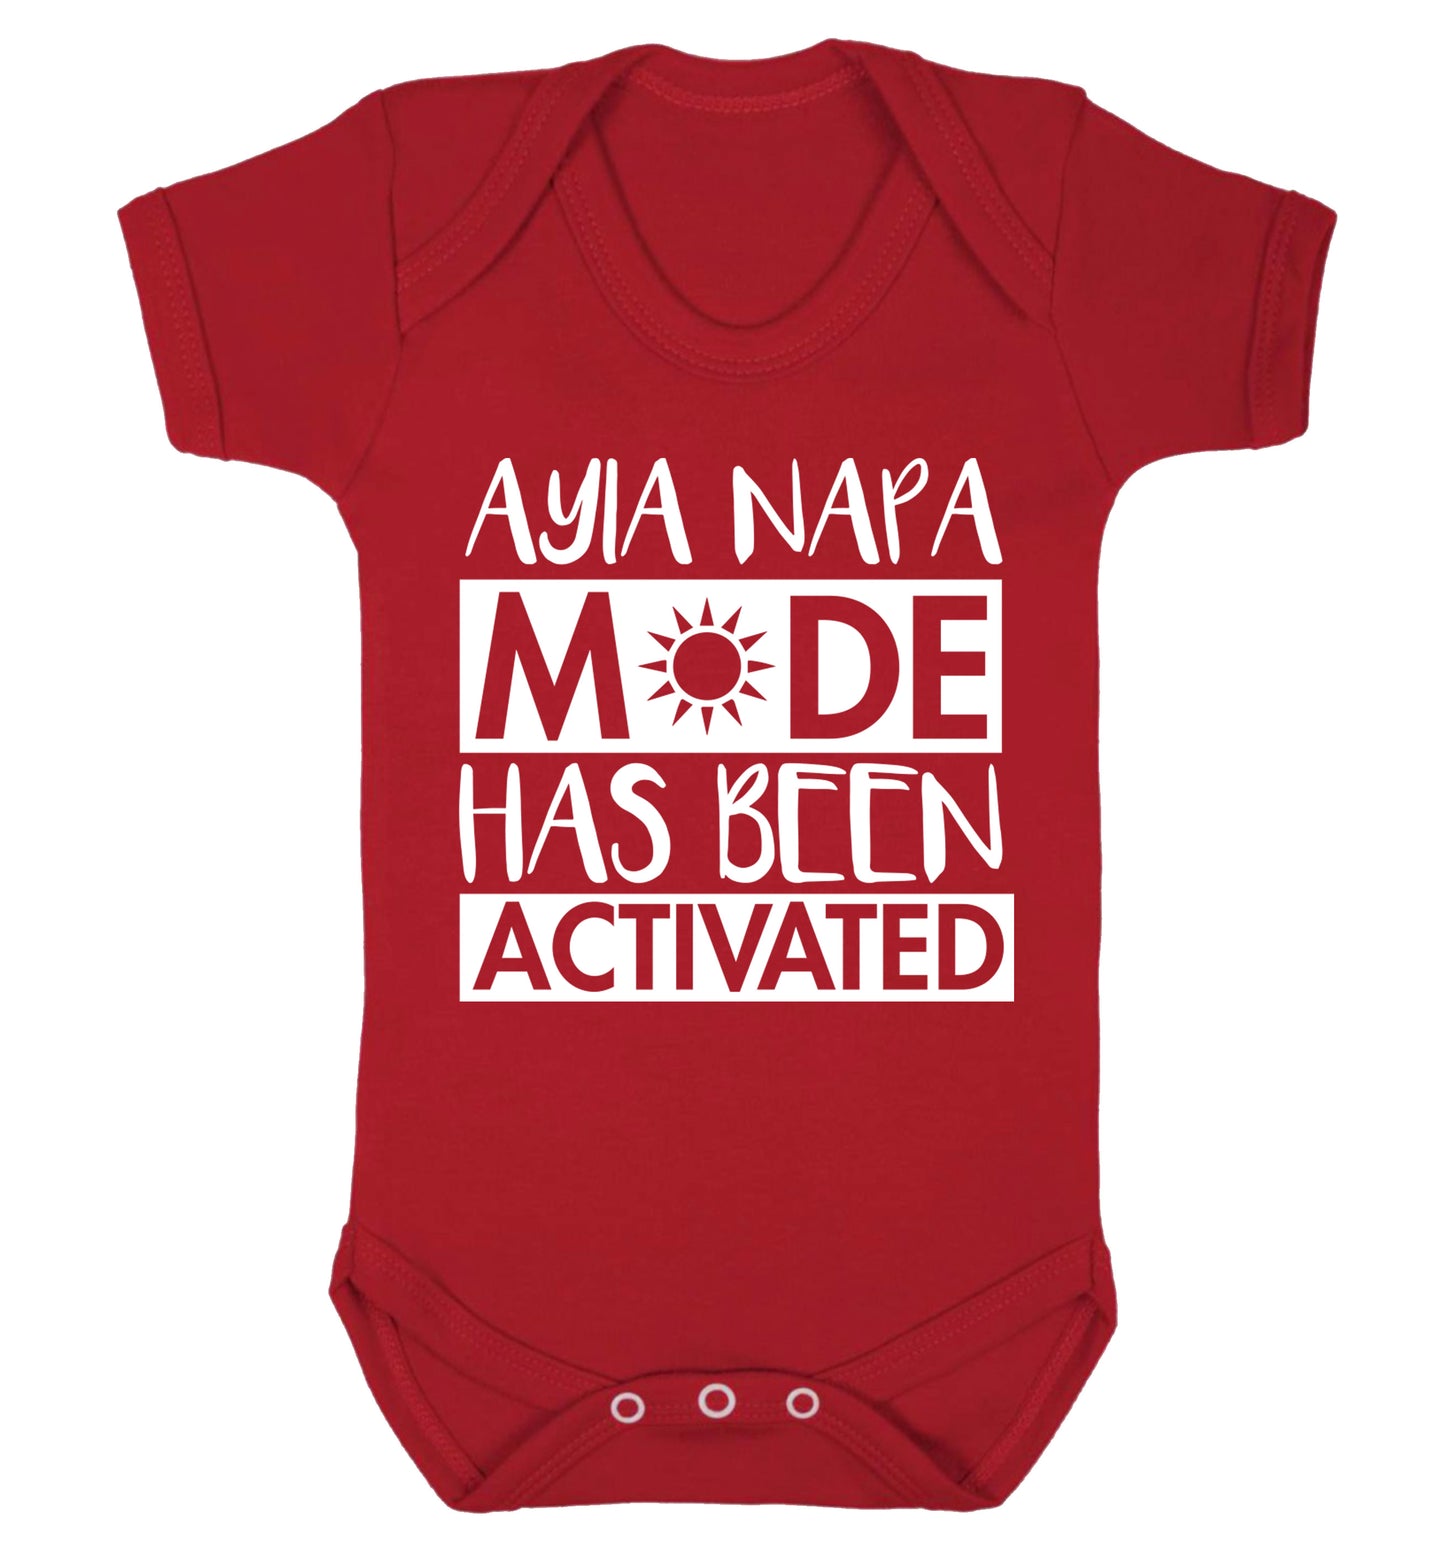 Ayia Napa mode has been activated Baby Vest red 18-24 months